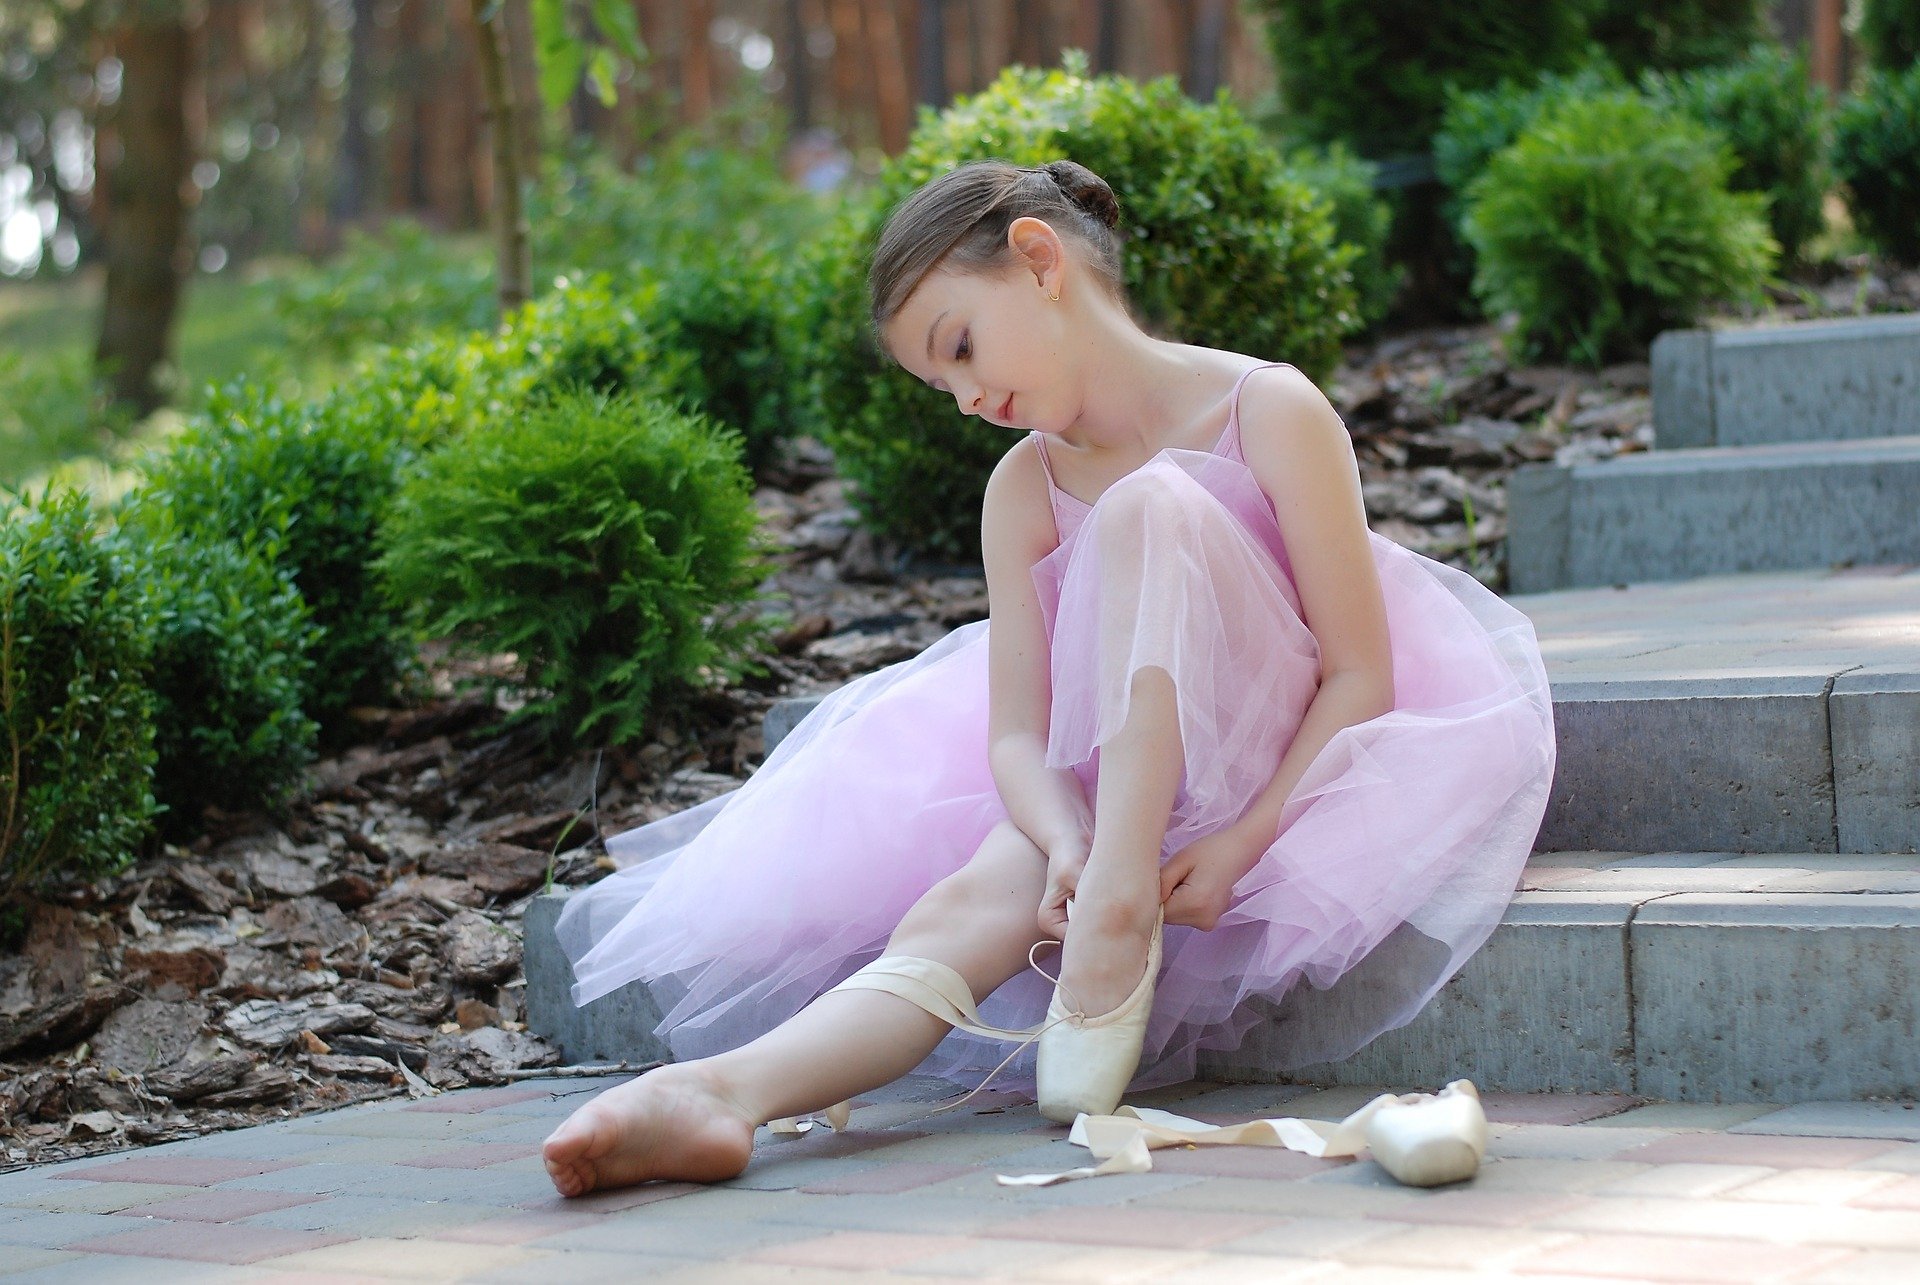 A young girl putting on her ballet shoes. | Source: Pixabay.